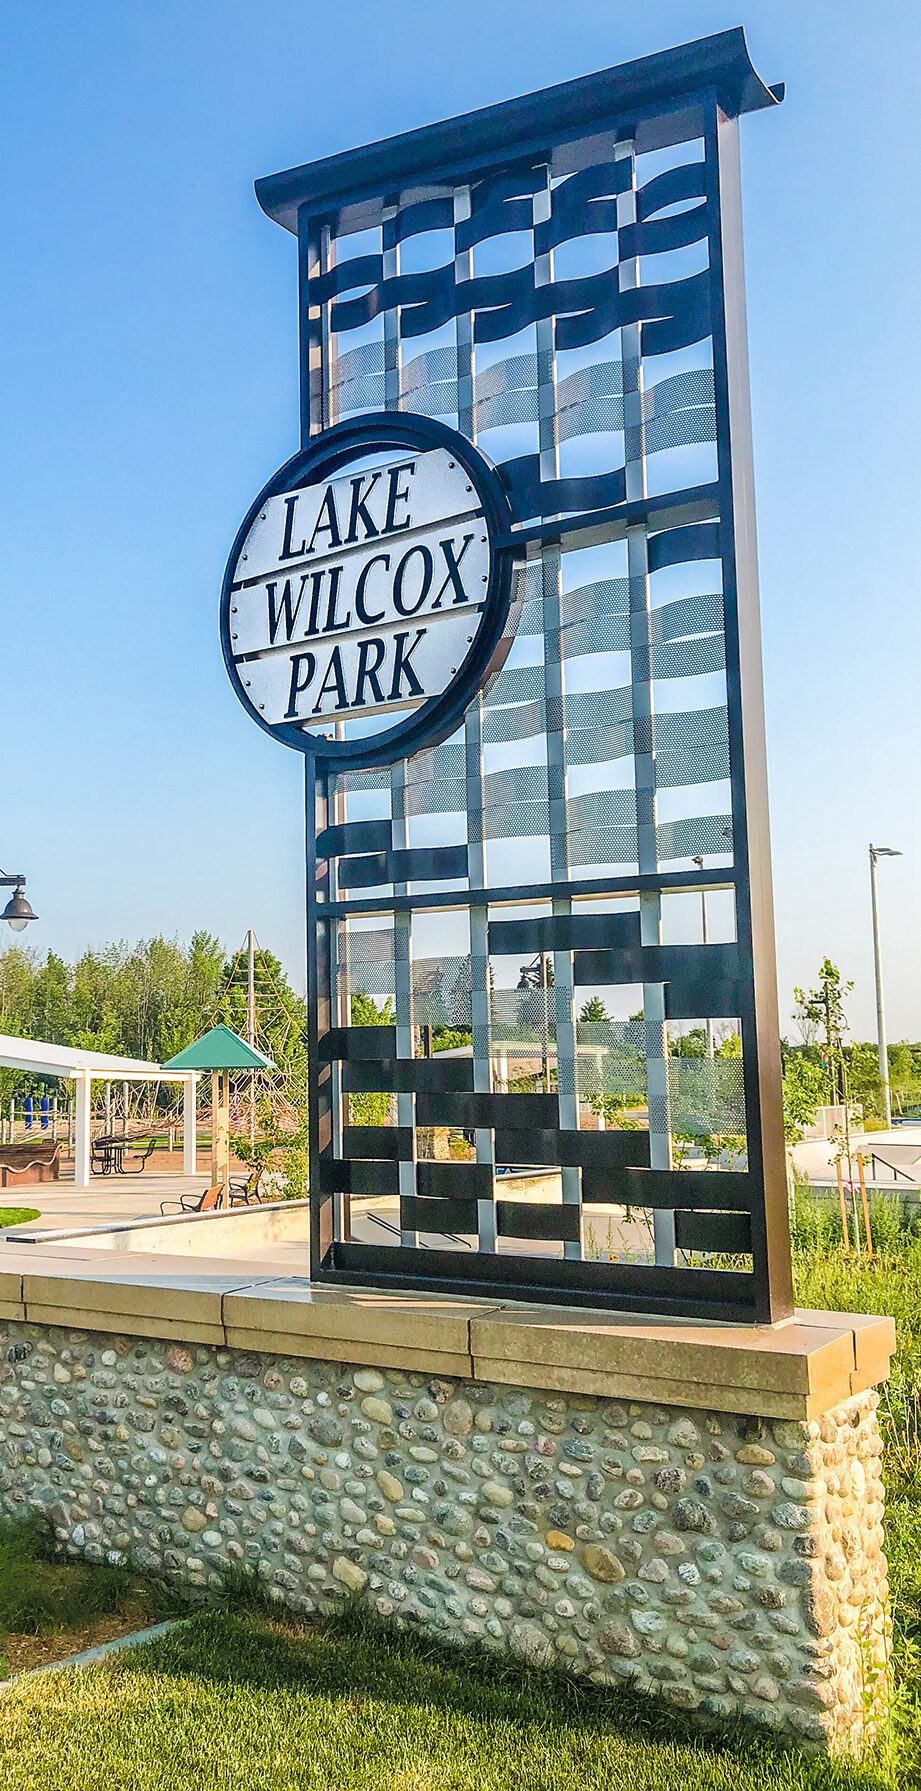 Lake wilcox park outdoor signage